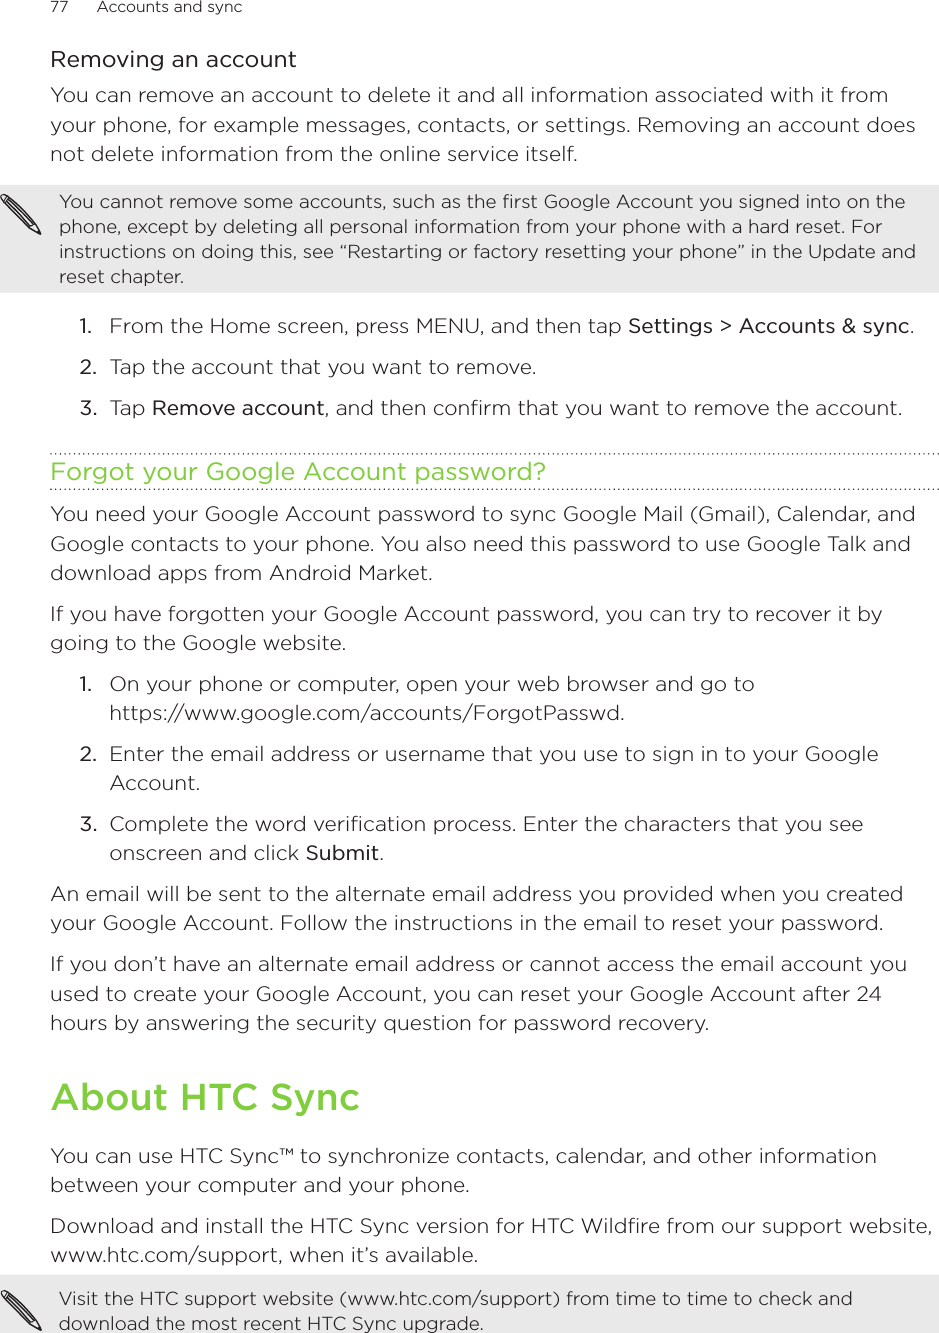 77      Accounts and sync      Removing an accountYou can remove an account to delete it and all information associated with it from your phone, for example messages, contacts, or settings. Removing an account does not delete information from the online service itself.You cannot remove some accounts, such as the first Google Account you signed into on the phone, except by deleting all personal information from your phone with a hard reset. For instructions on doing this, see “Restarting or factory resetting your phone” in the Update and reset chapter.From the Home screen, press MENU, and then tap Settings &gt; Accounts &amp; sync. Tap the account that you want to remove.Tap Remove account, and then confirm that you want to remove the account.Forgot your Google Account password?You need your Google Account password to sync Google Mail (Gmail), Calendar, and Google contacts to your phone. You also need this password to use Google Talk and download apps from Android Market.If you have forgotten your Google Account password, you can try to recover it by going to the Google website.On your phone or computer, open your web browser and go to  https://www.google.com/accounts/ForgotPasswd.Enter the email address or username that you use to sign in to your Google Account.Complete the word verification process. Enter the characters that you see onscreen and click Submit.An email will be sent to the alternate email address you provided when you created your Google Account. Follow the instructions in the email to reset your password.If you don’t have an alternate email address or cannot access the email account you used to create your Google Account, you can reset your Google Account after 24 hours by answering the security question for password recovery.About HTC SyncYou can use HTC Sync™ to synchronize contacts, calendar, and other information between your computer and your phone.Download and install the HTC Sync version for HTC Wildfire from our support website,  www.htc.com/support, when it’s available.Visit the HTC support website (www.htc.com/support) from time to time to check and download the most recent HTC Sync upgrade.1.2.3.1.2.3.